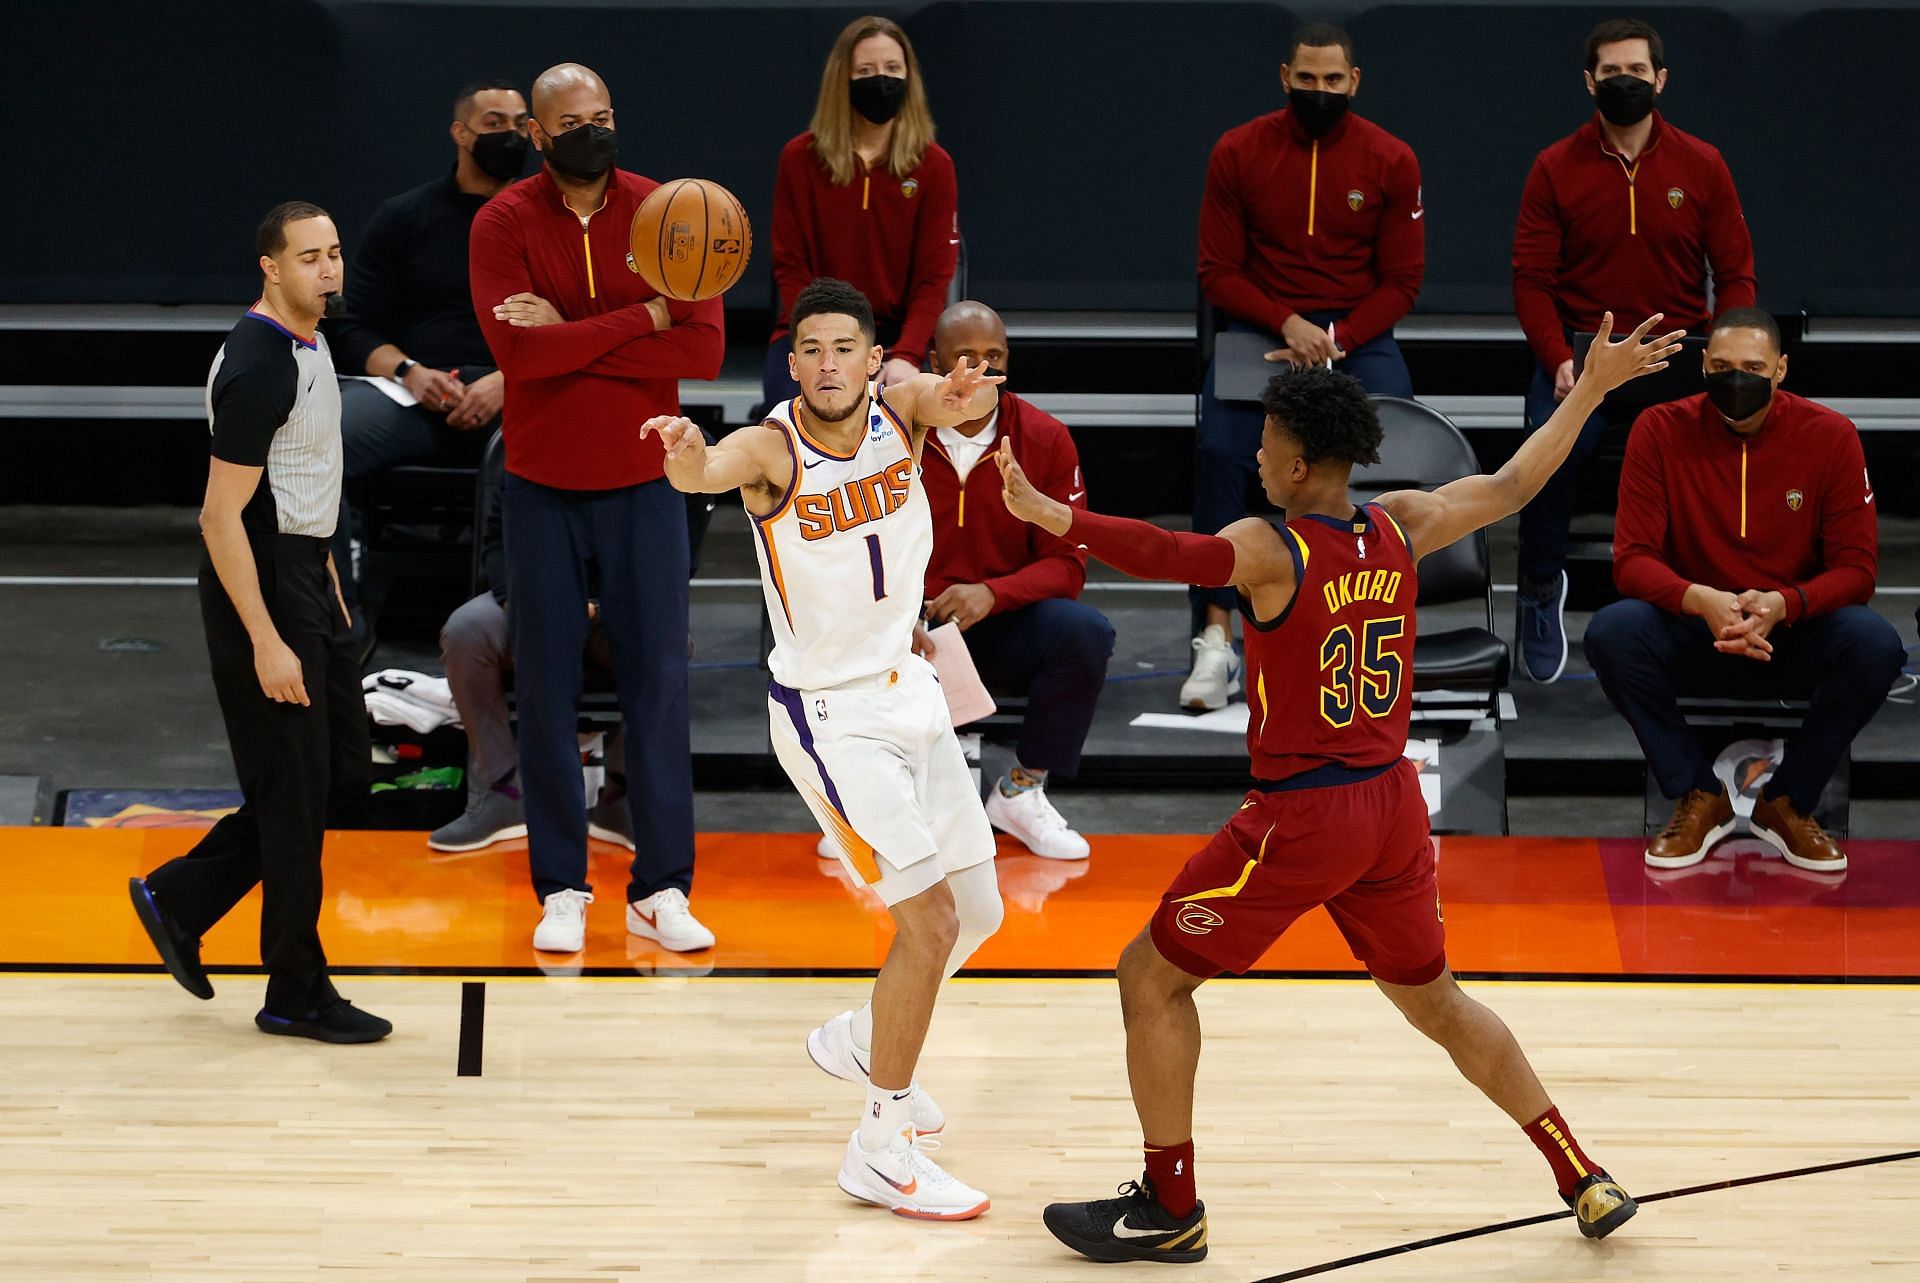 Devin Booker of the Phoenix Suns against Isaac Okoro of the Cleveland Cavaliers.